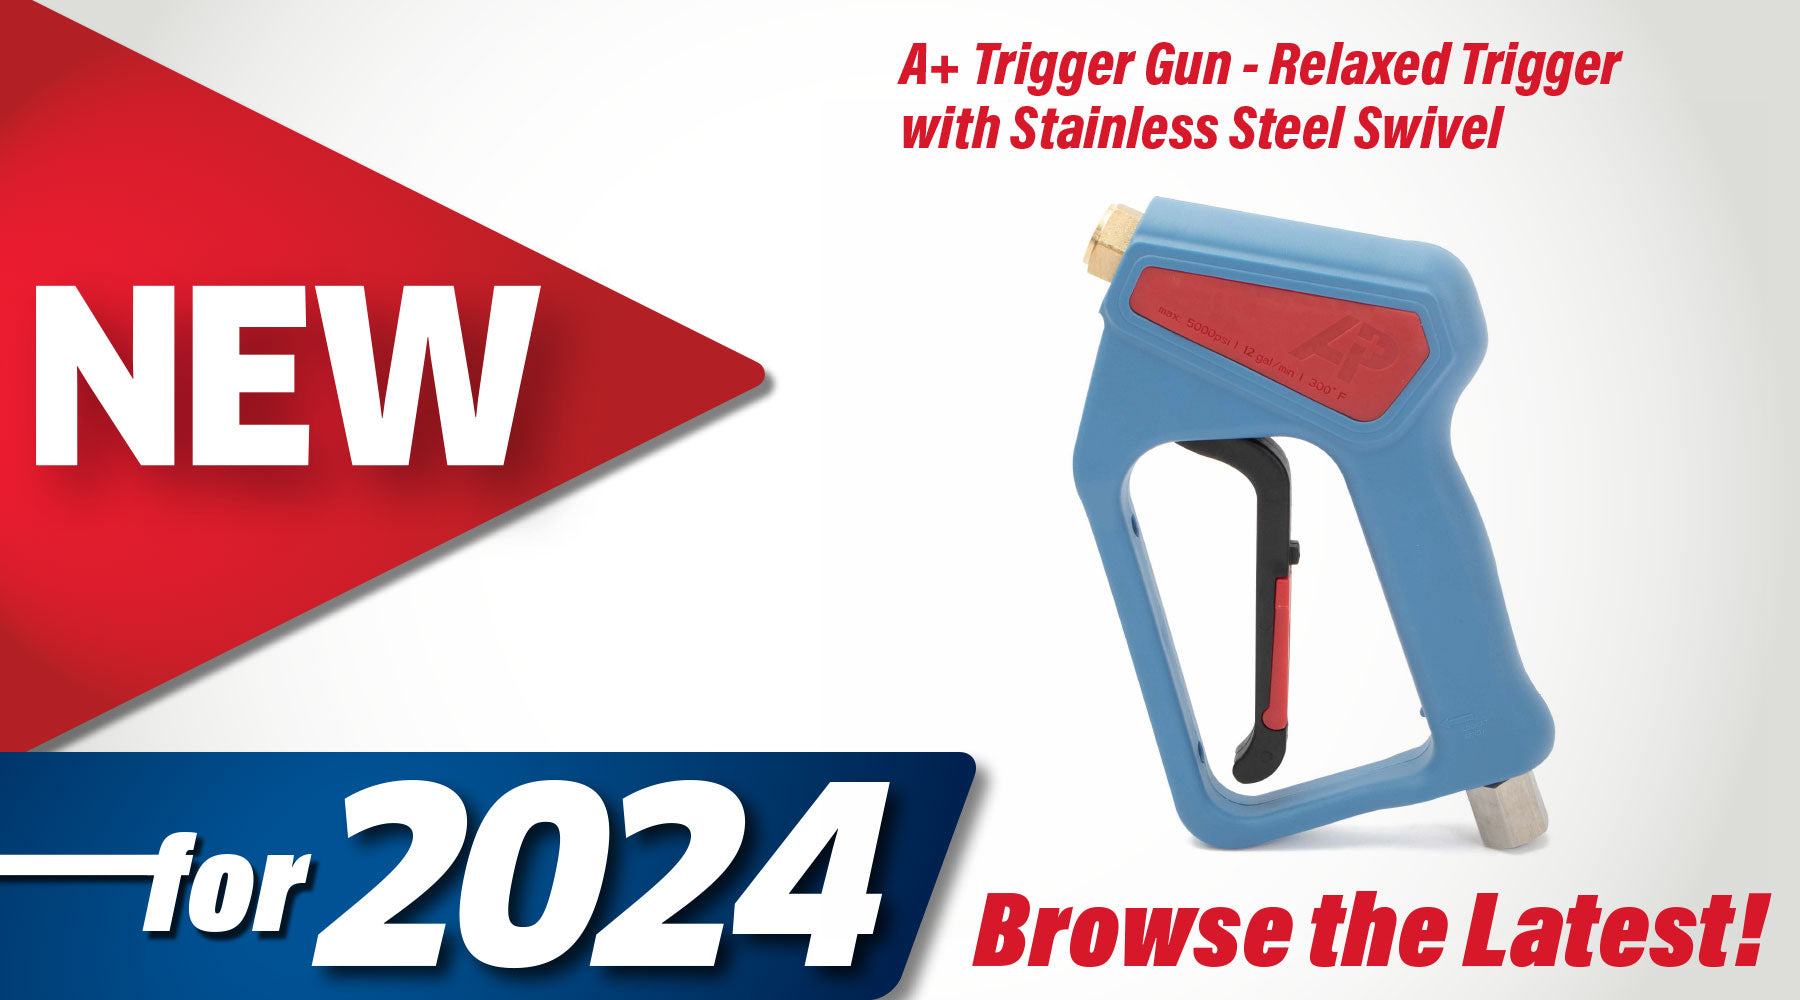 Image of A+ trigger gun on white background with the text "New for 2024, Browse the latest"